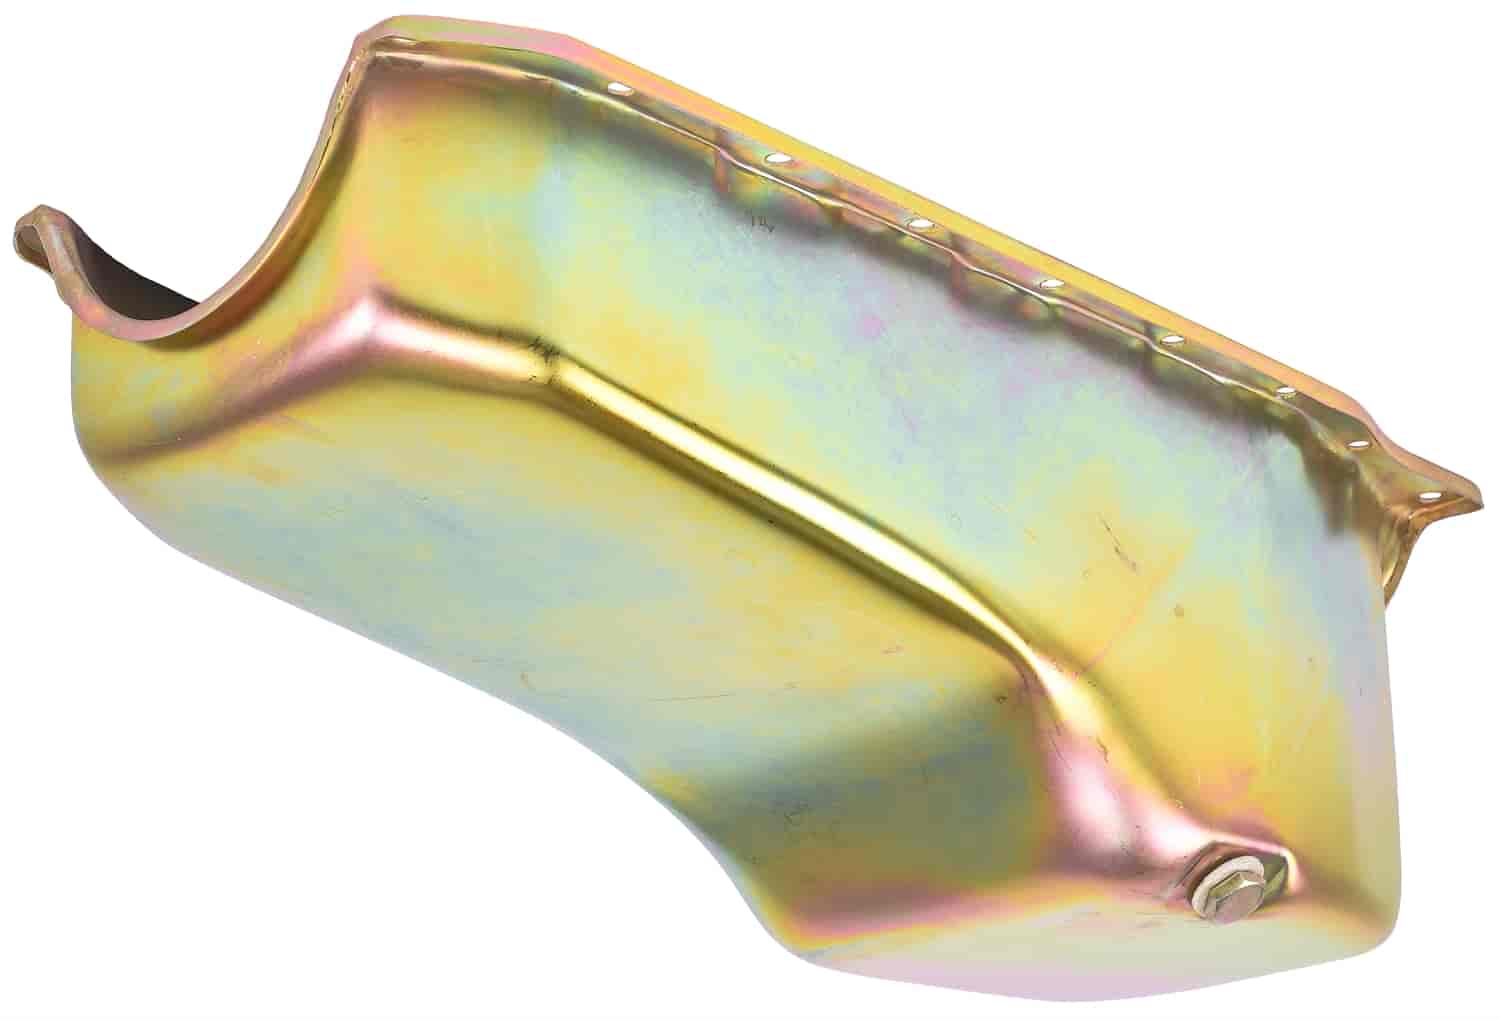 Stock-Style Replacement Oil Pan for 1986-1992 Small Block